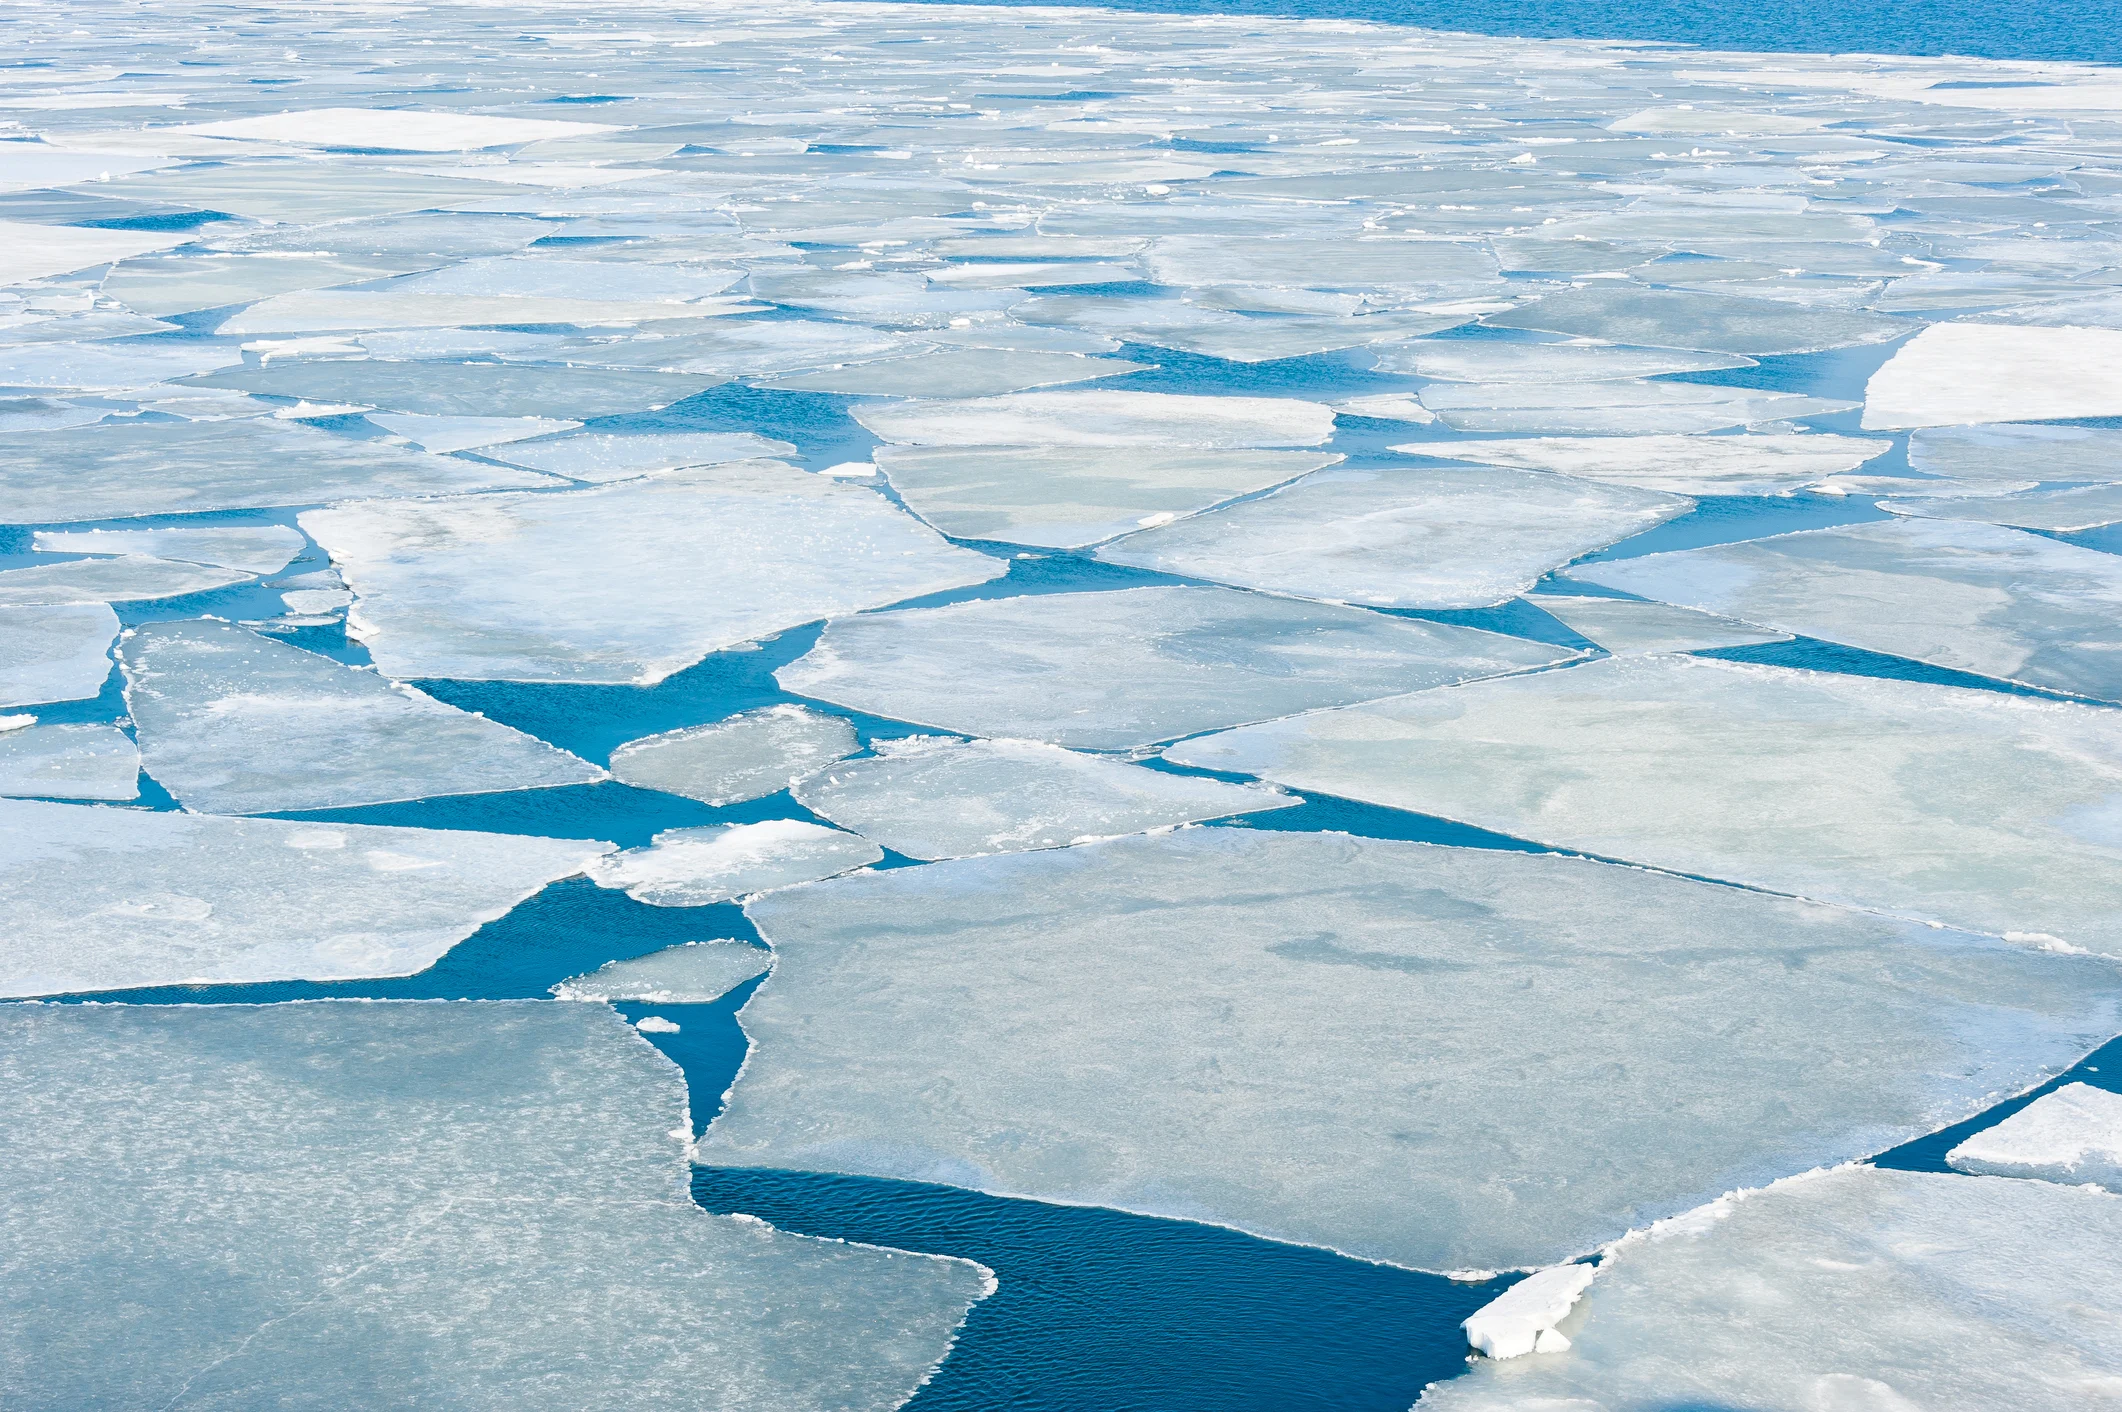 thinning arctic sea ice (tupikov. iStock / Getty Images Plus)